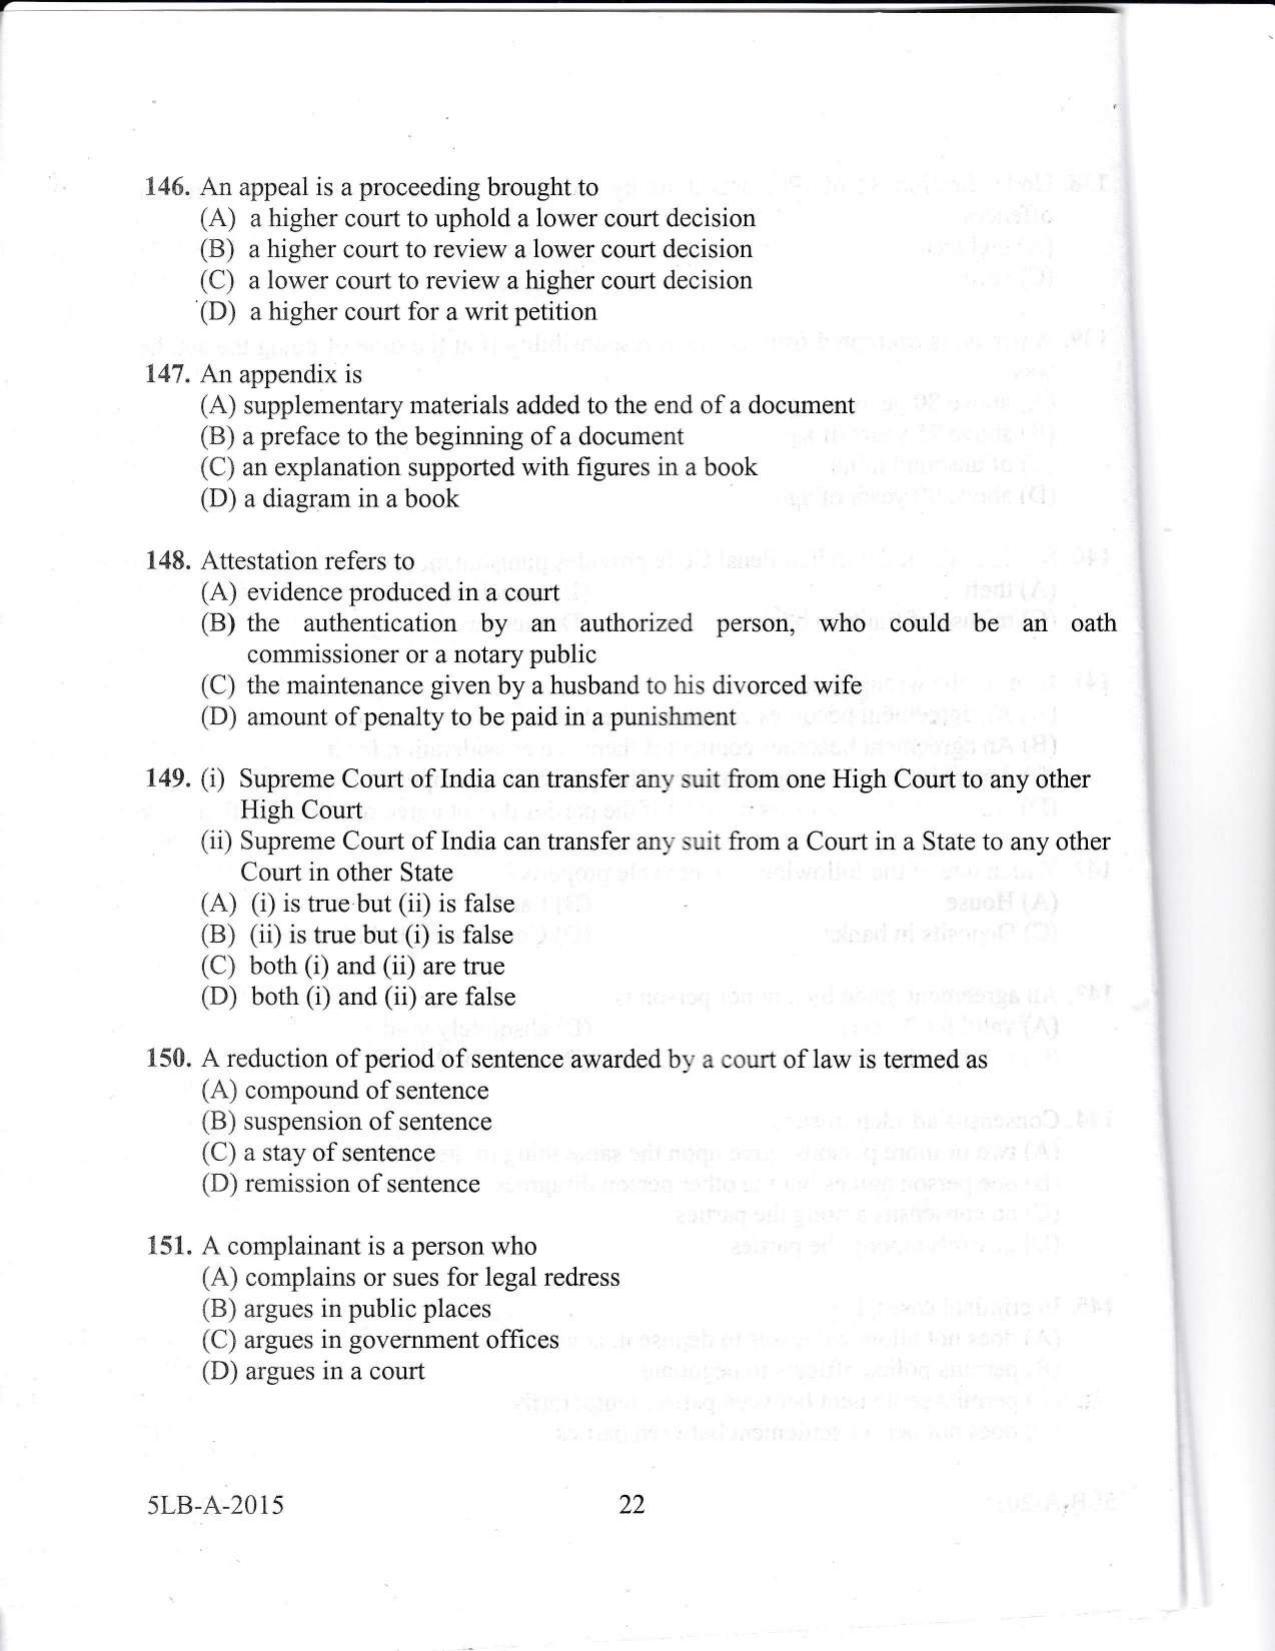 KLEE 5 Year LLB Exam 2015 Question Paper - Page 22